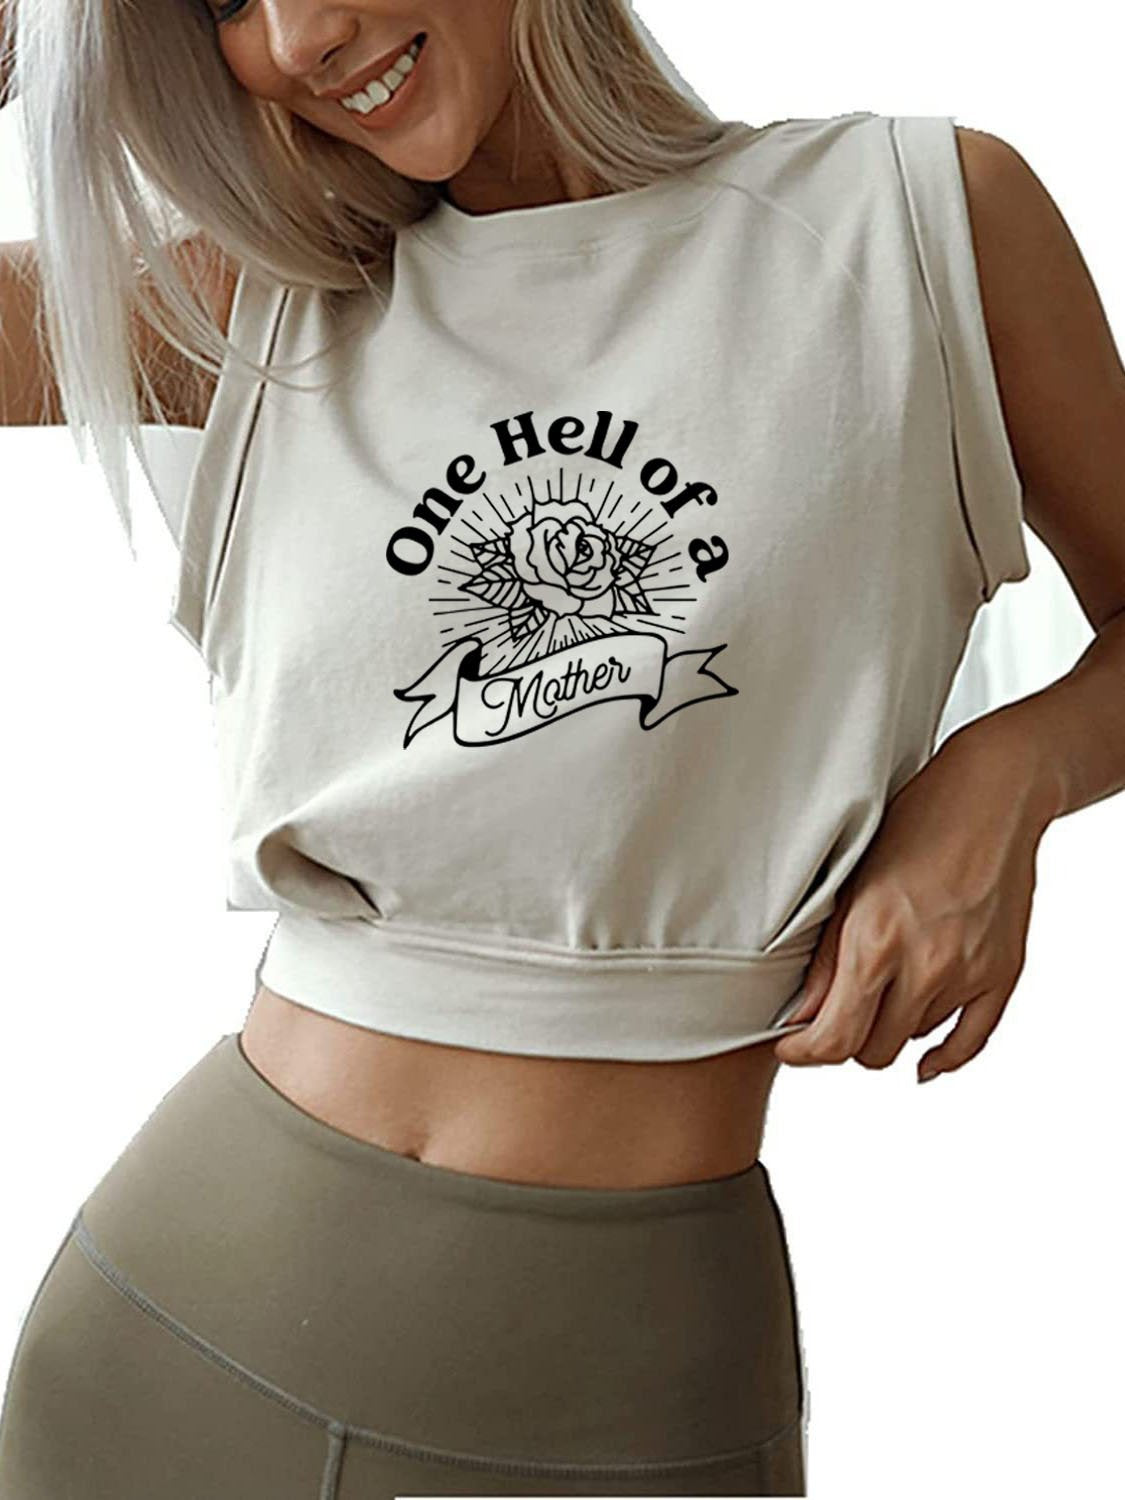 ONE HELL OF A MOTHER SLEEVELESS CROP TOPS